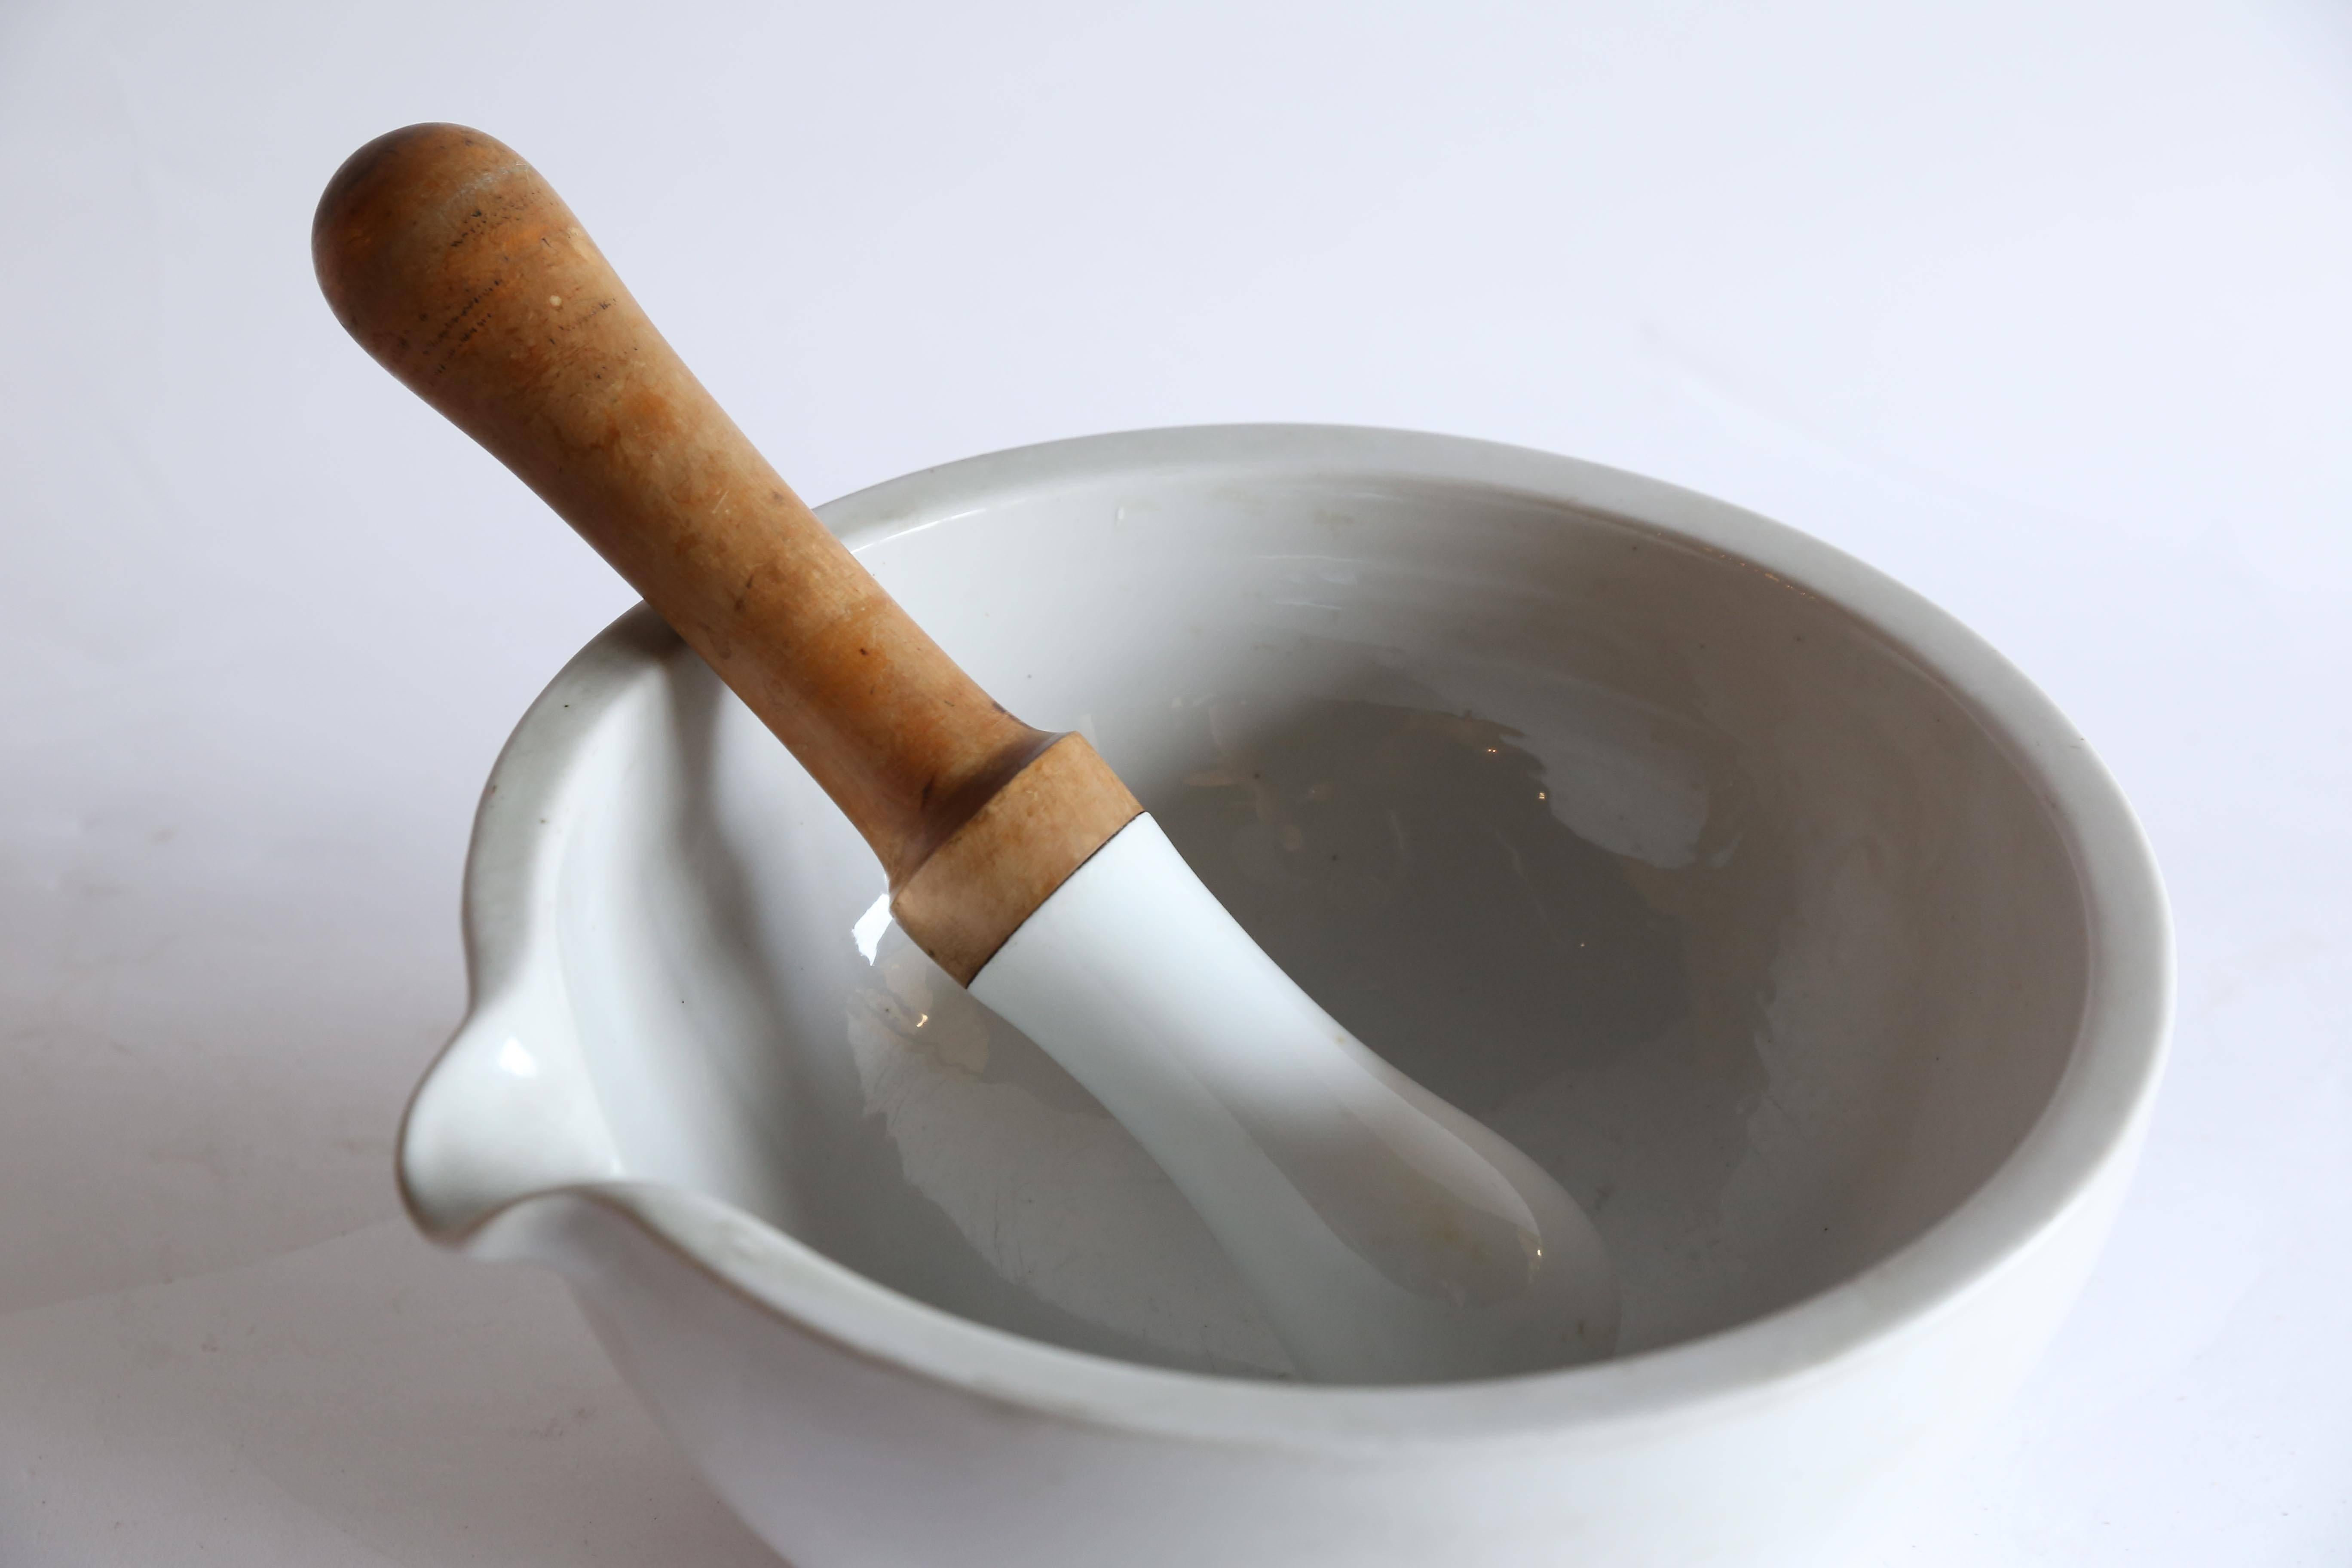 A generous porcelain mortar and pestle from France. The porcelain surface of the mortar is in nearly pristine condition with no chips or scratches. The wooden handle on the 12.5 inch porcelain pestle does have a small split that does not detract